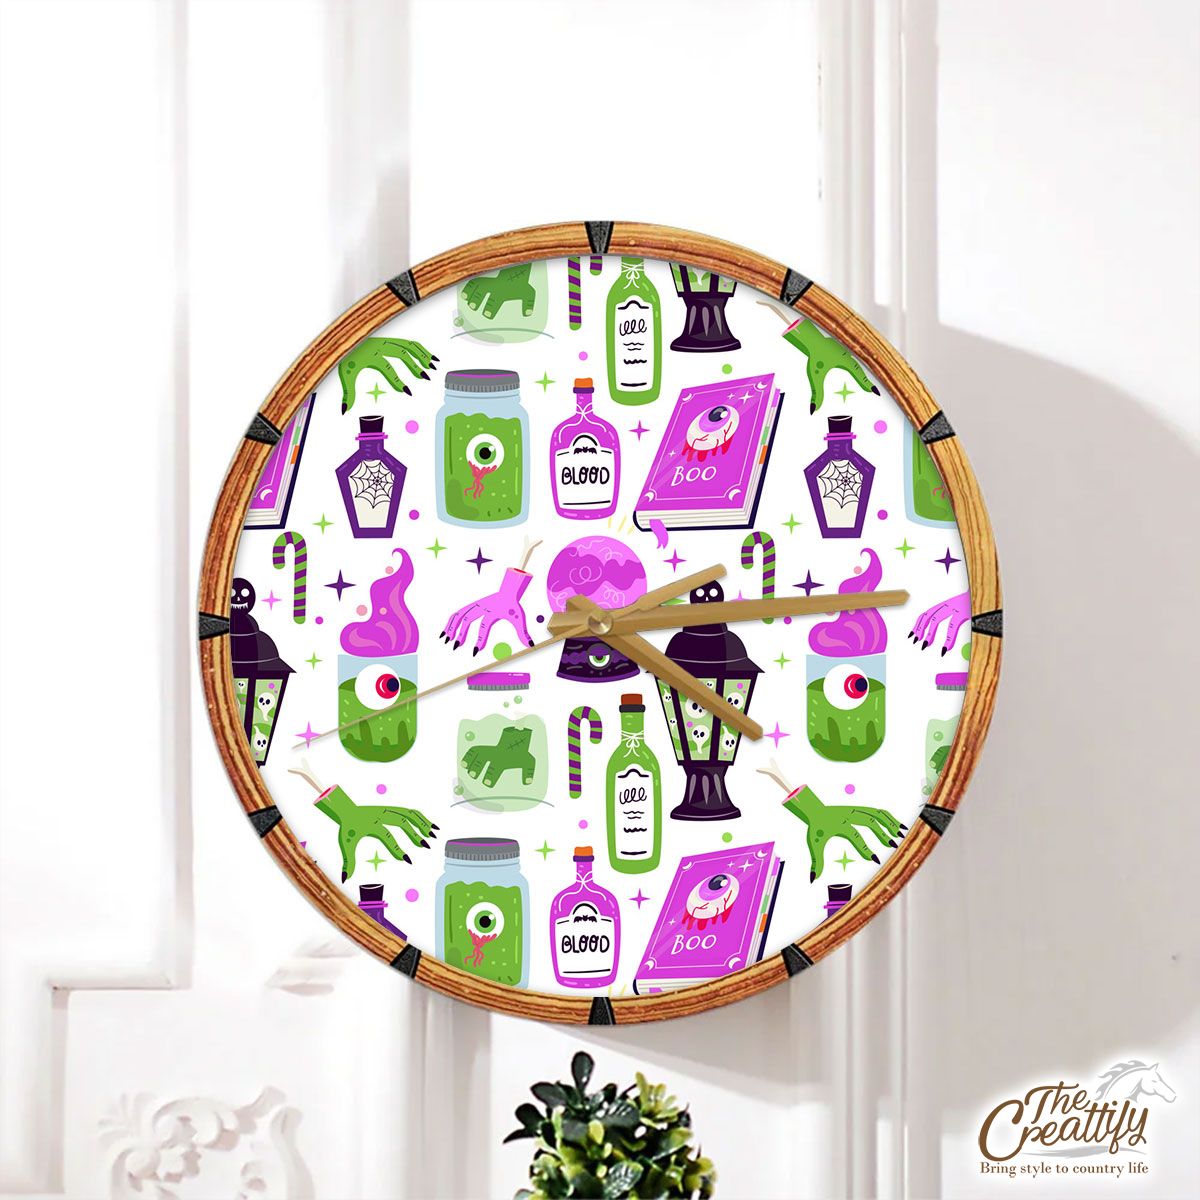 Witch Potions, Creepy Hand, Blood, Wicked Witches Light Halloween Wall Clock